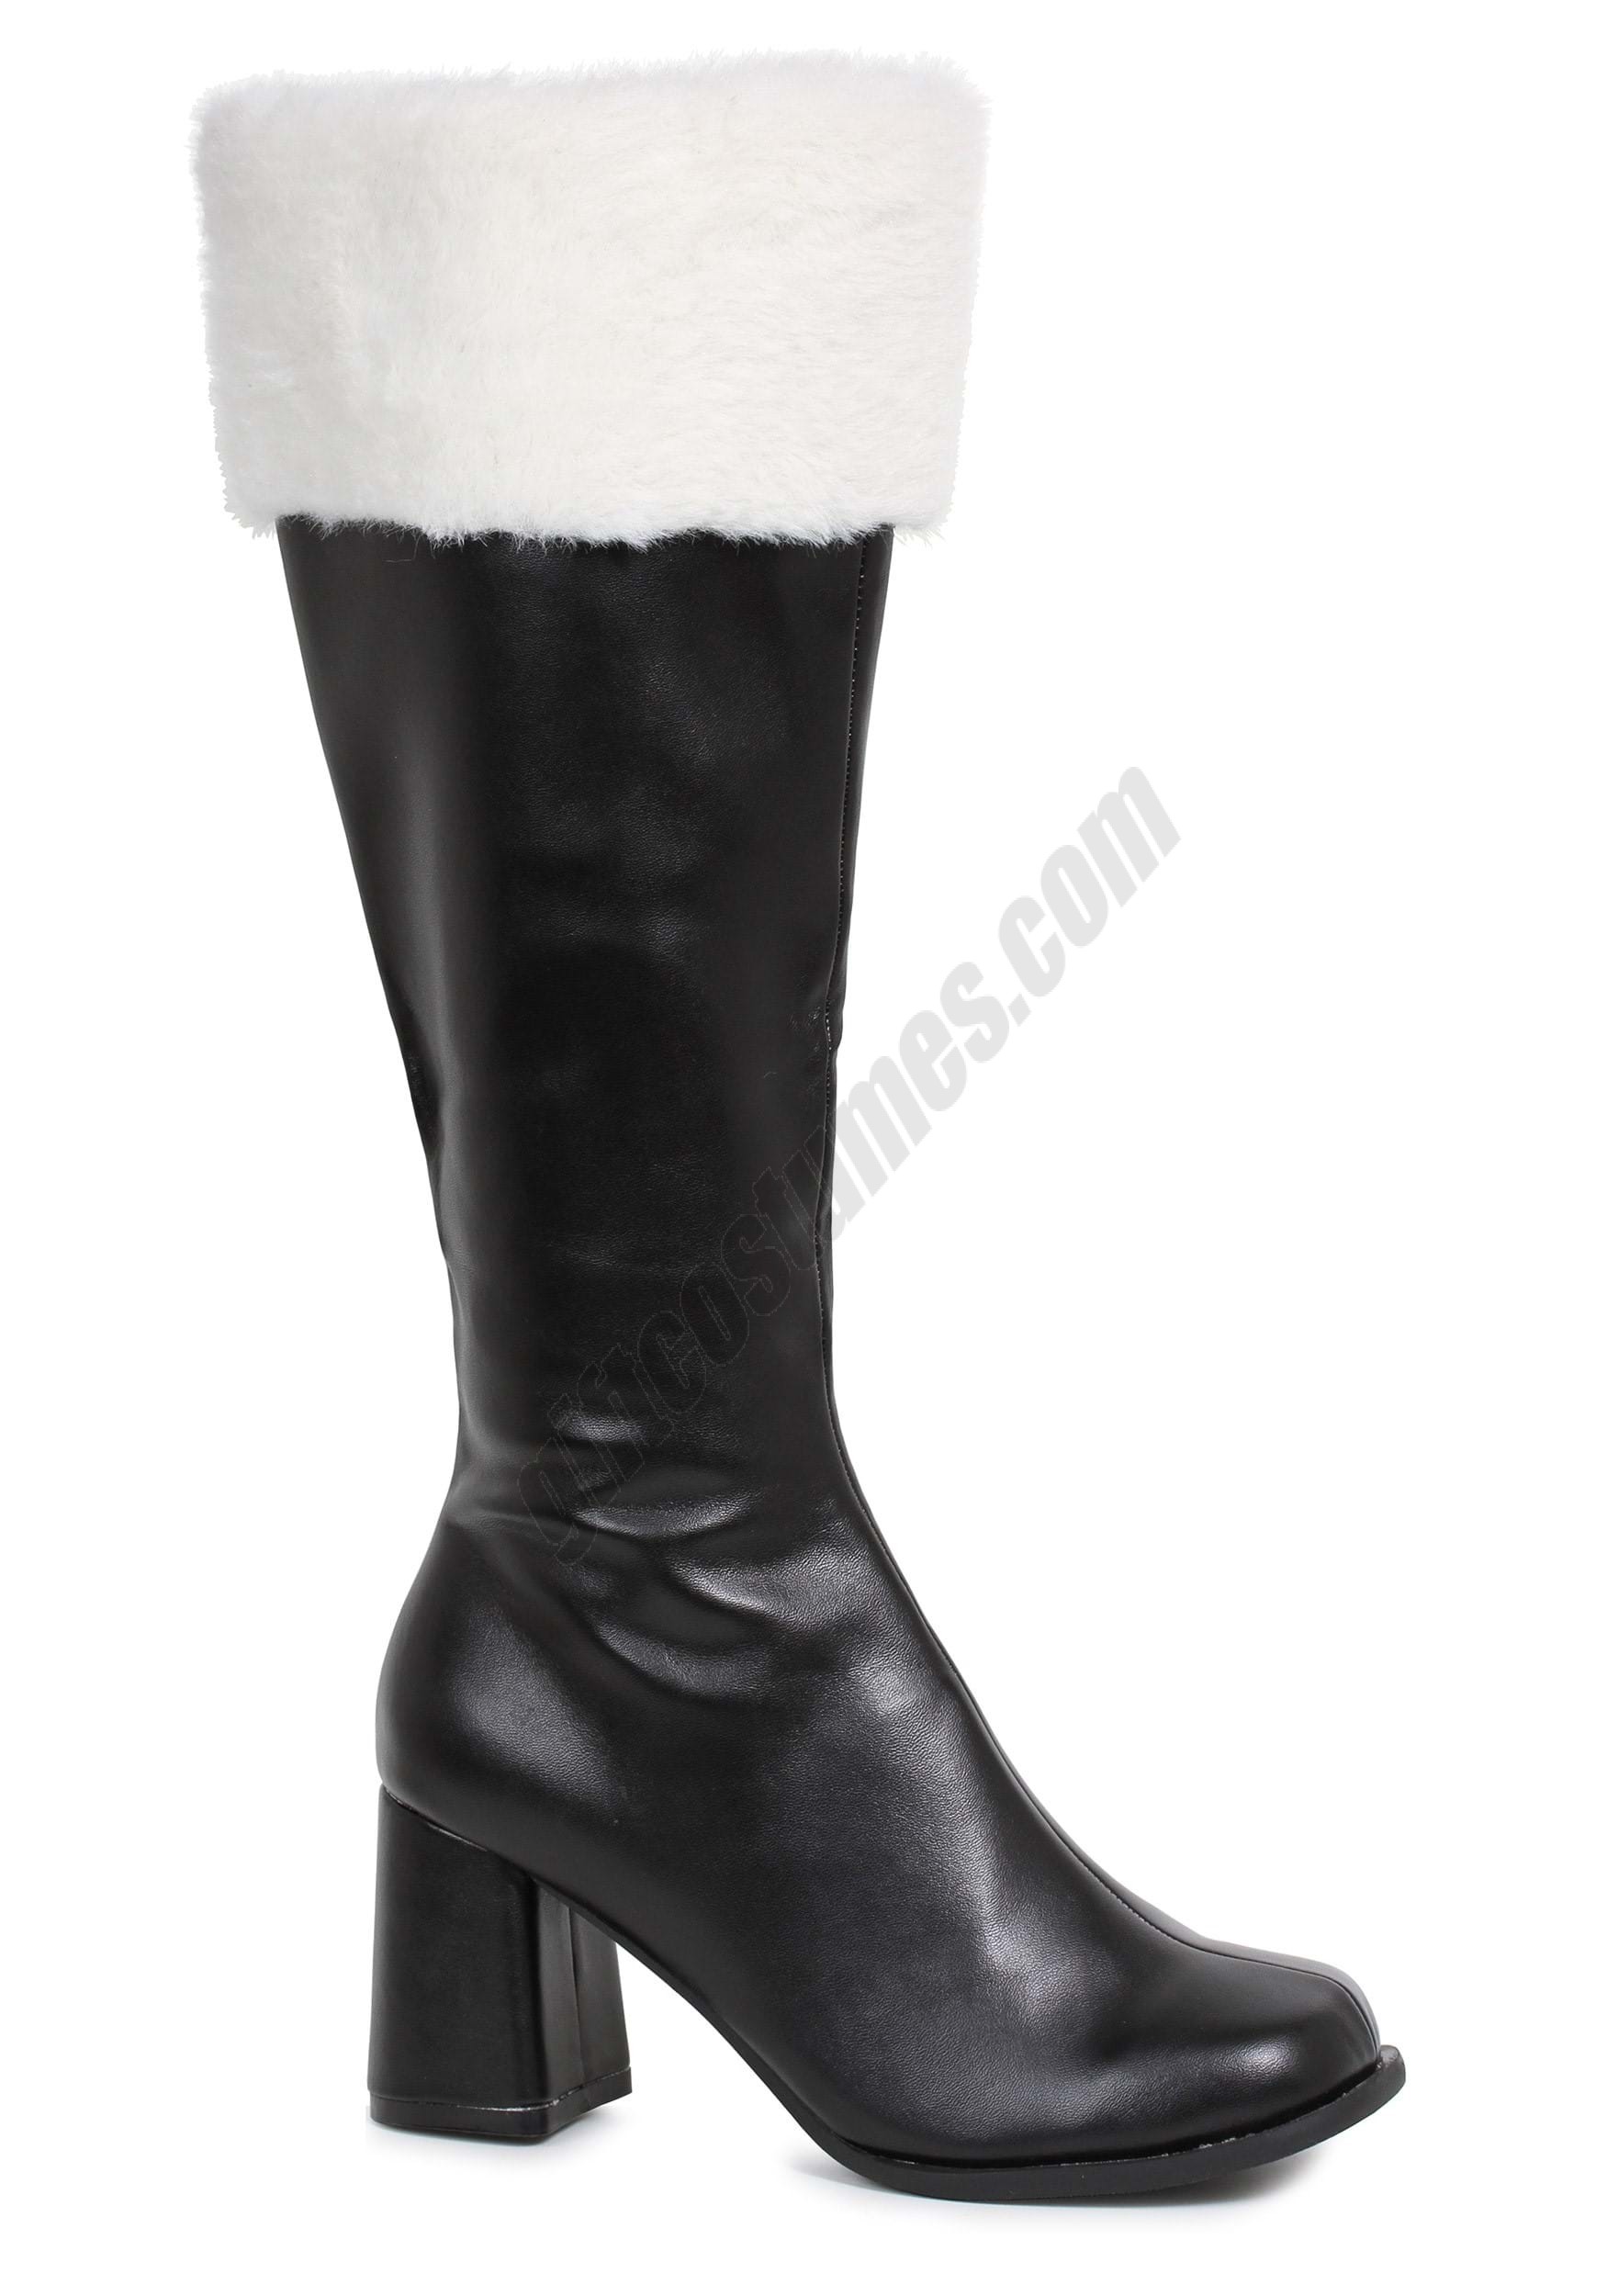 Gogo Fur Topped Boots for Women Promotions - Gogo Fur Topped Boots for Women Promotions